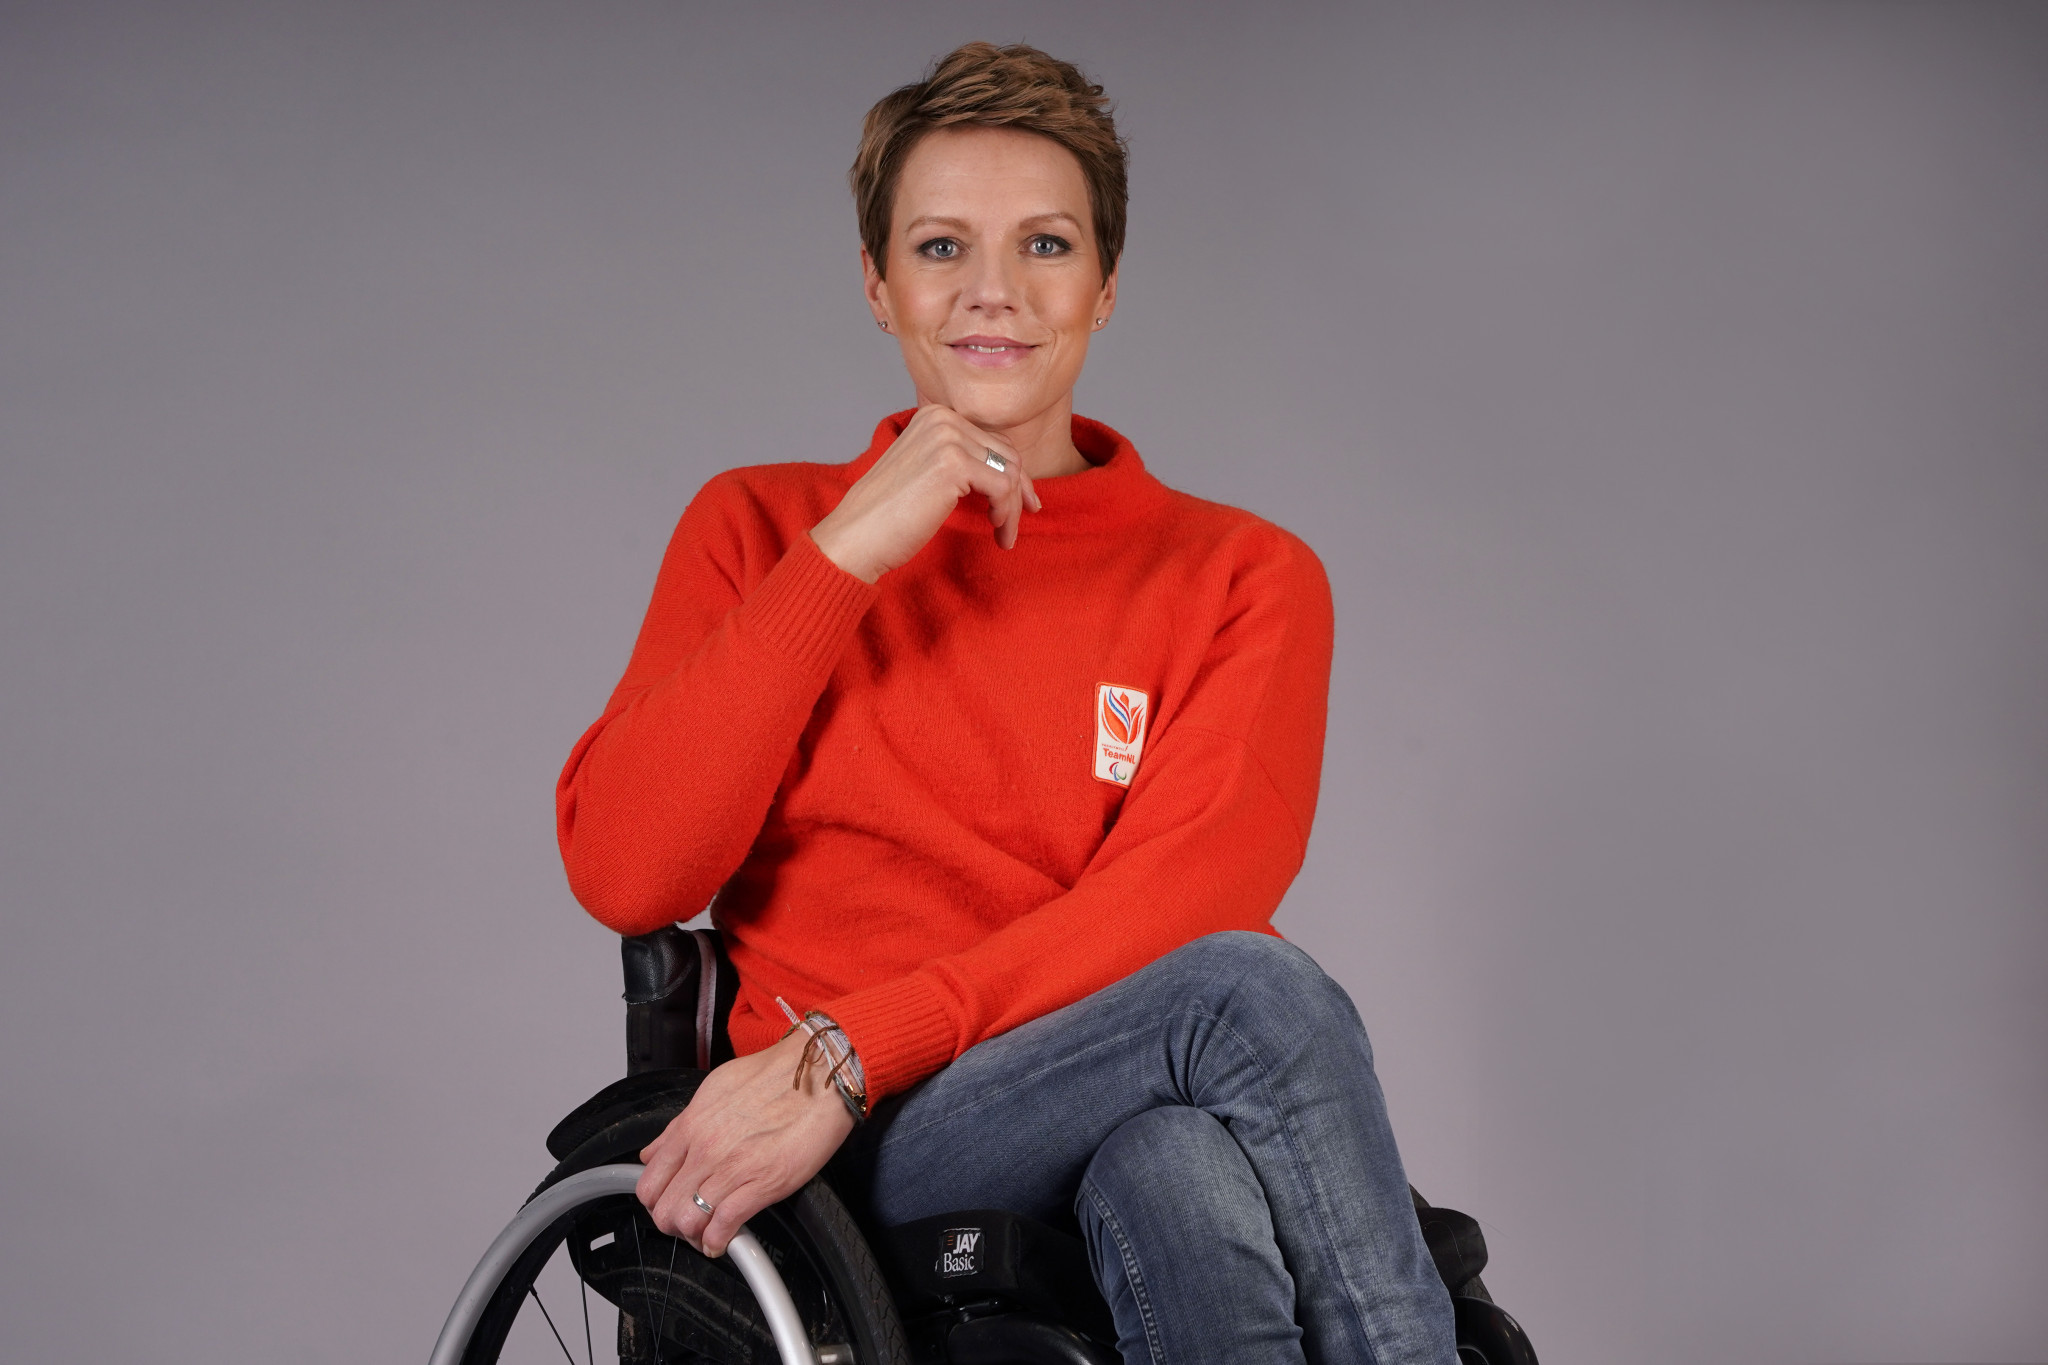 Esther Vergeer has been nominated for a position on the IPC Governing Board ©NOC*NSF/Mathilde Dusol 